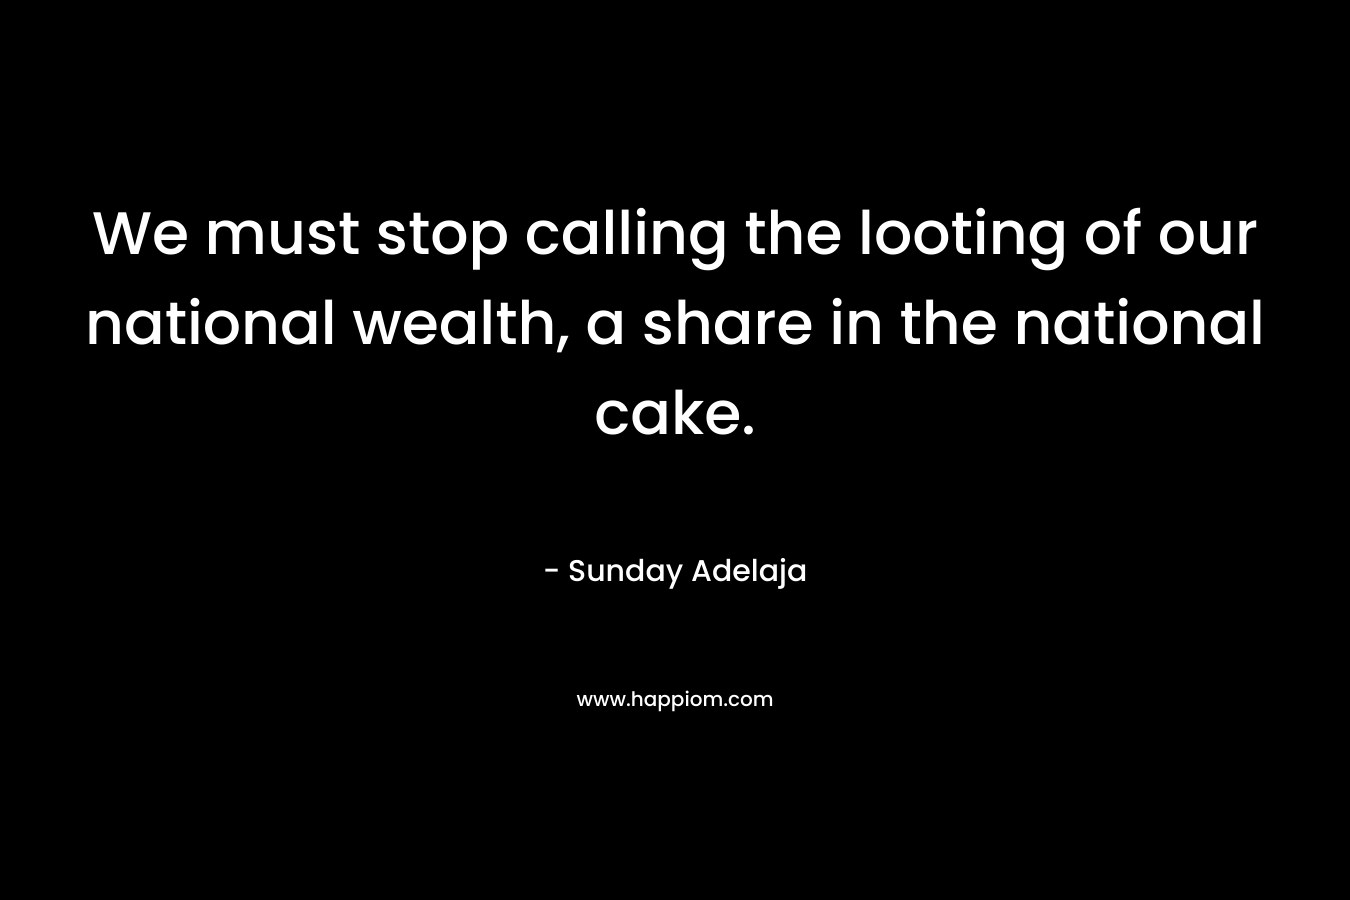 We must stop calling the looting of our national wealth, a share in the national cake.